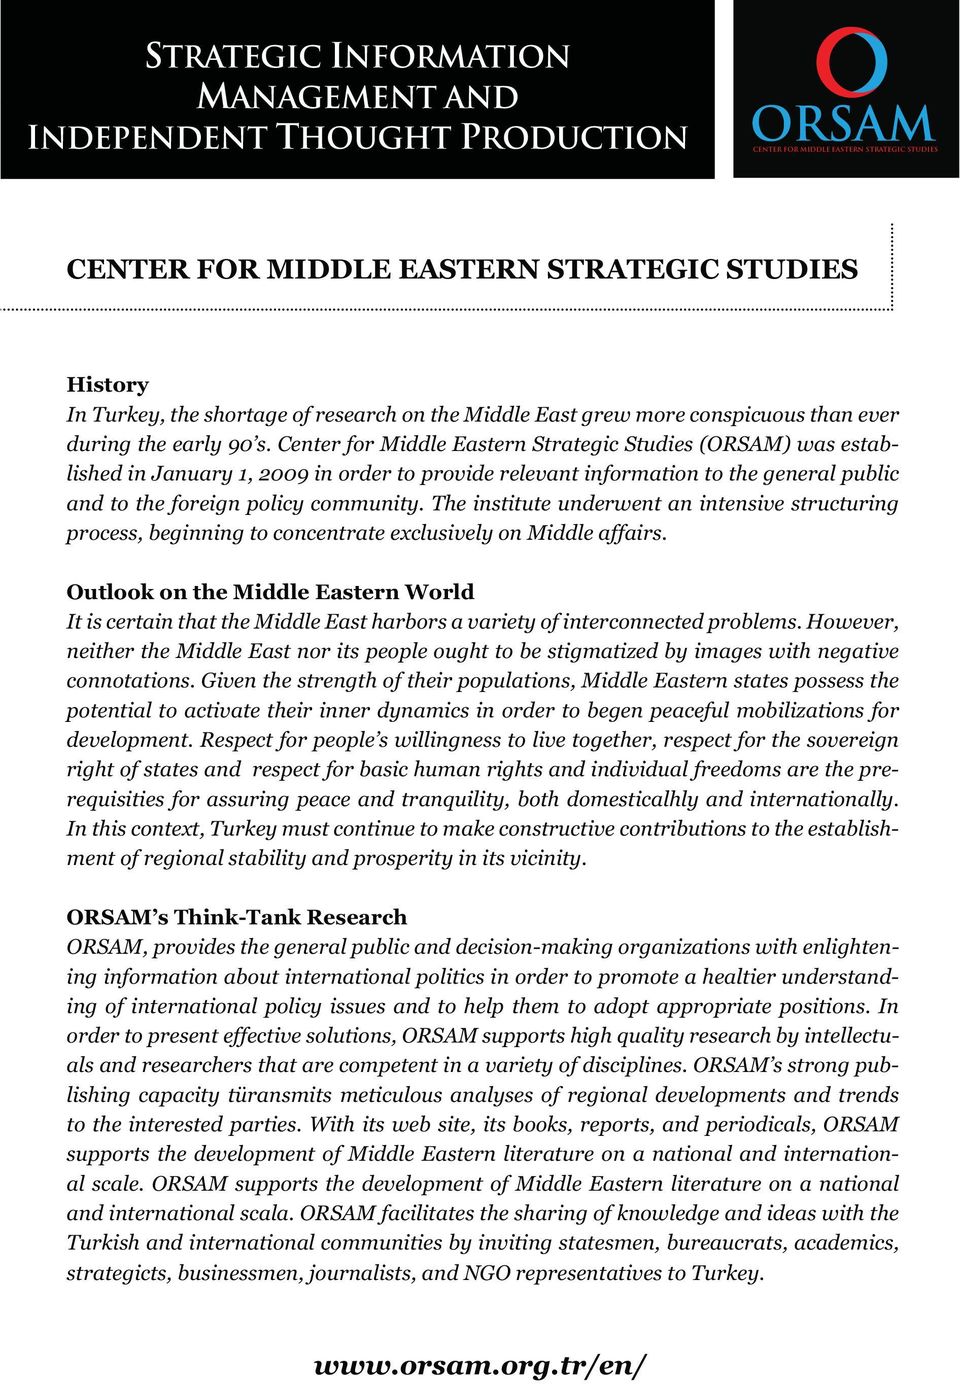 Center for Middle Eastern Strategic Studies (ORSAM) was established in January 1, 2009 in order to provide relevant information to the general public and to the foreign policy community.